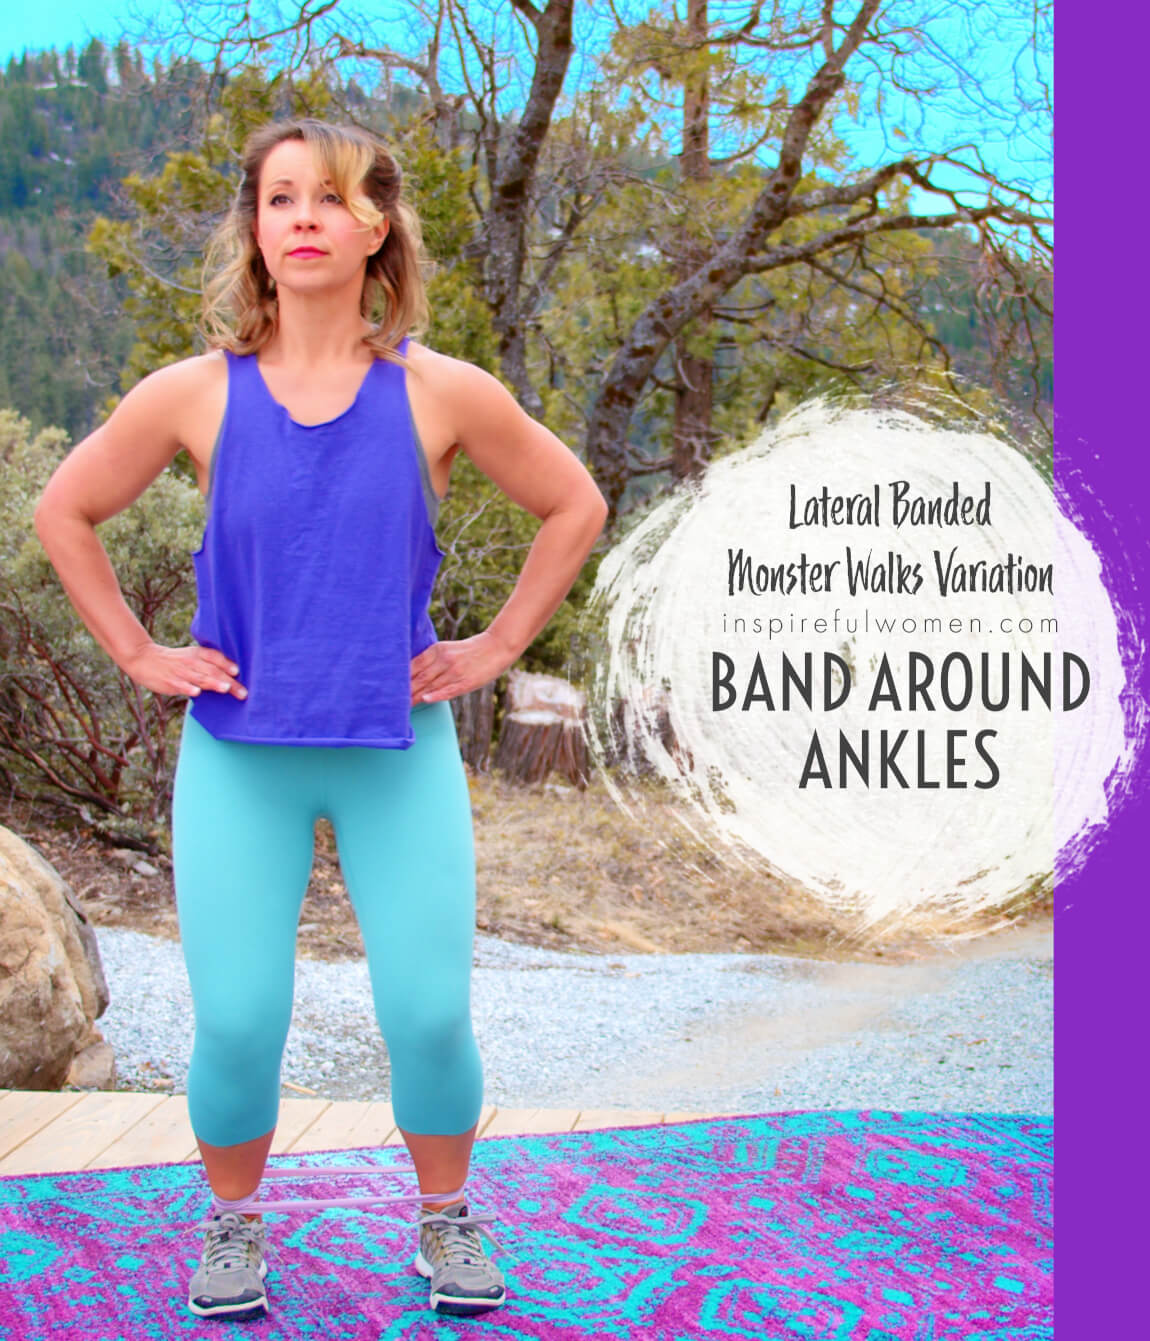 band-around-ankles-lateral-banded-monster-walk-variation